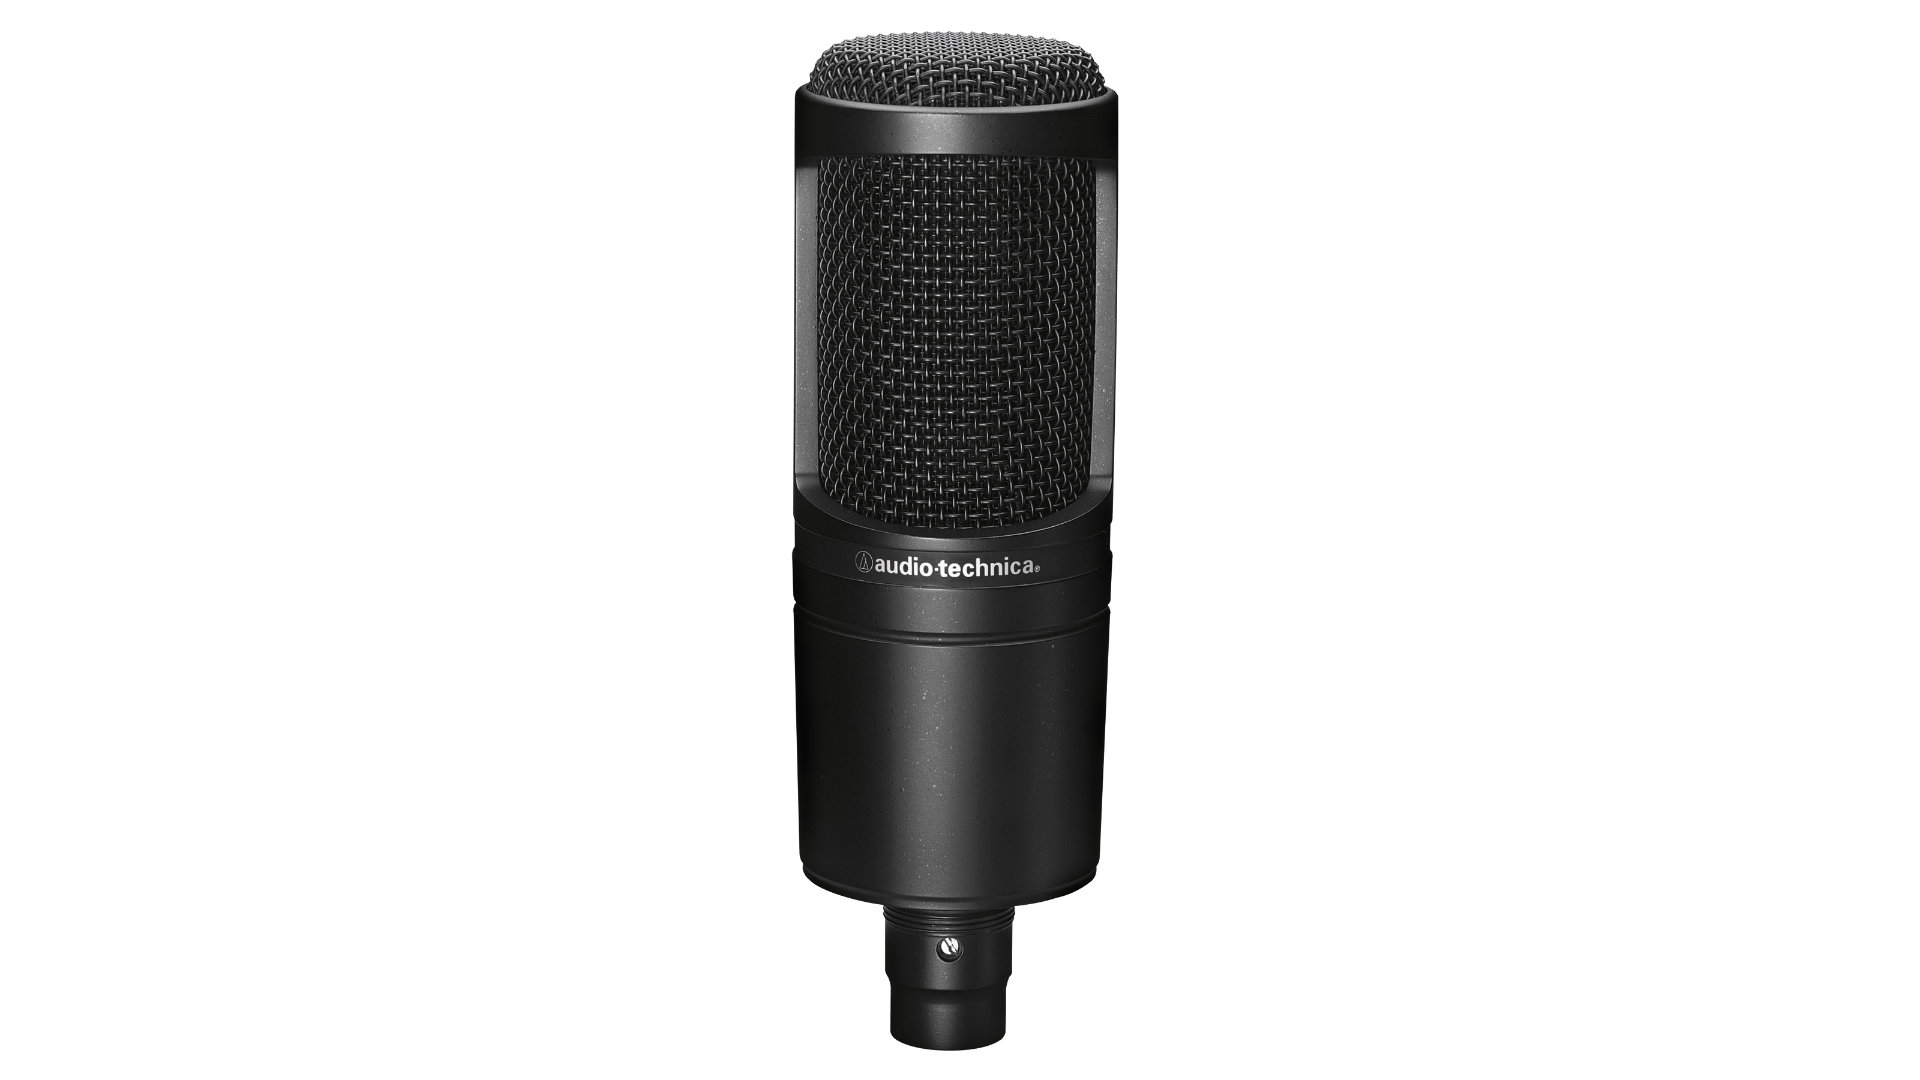 Best gaming microphone: the Audio Technica AT2020.